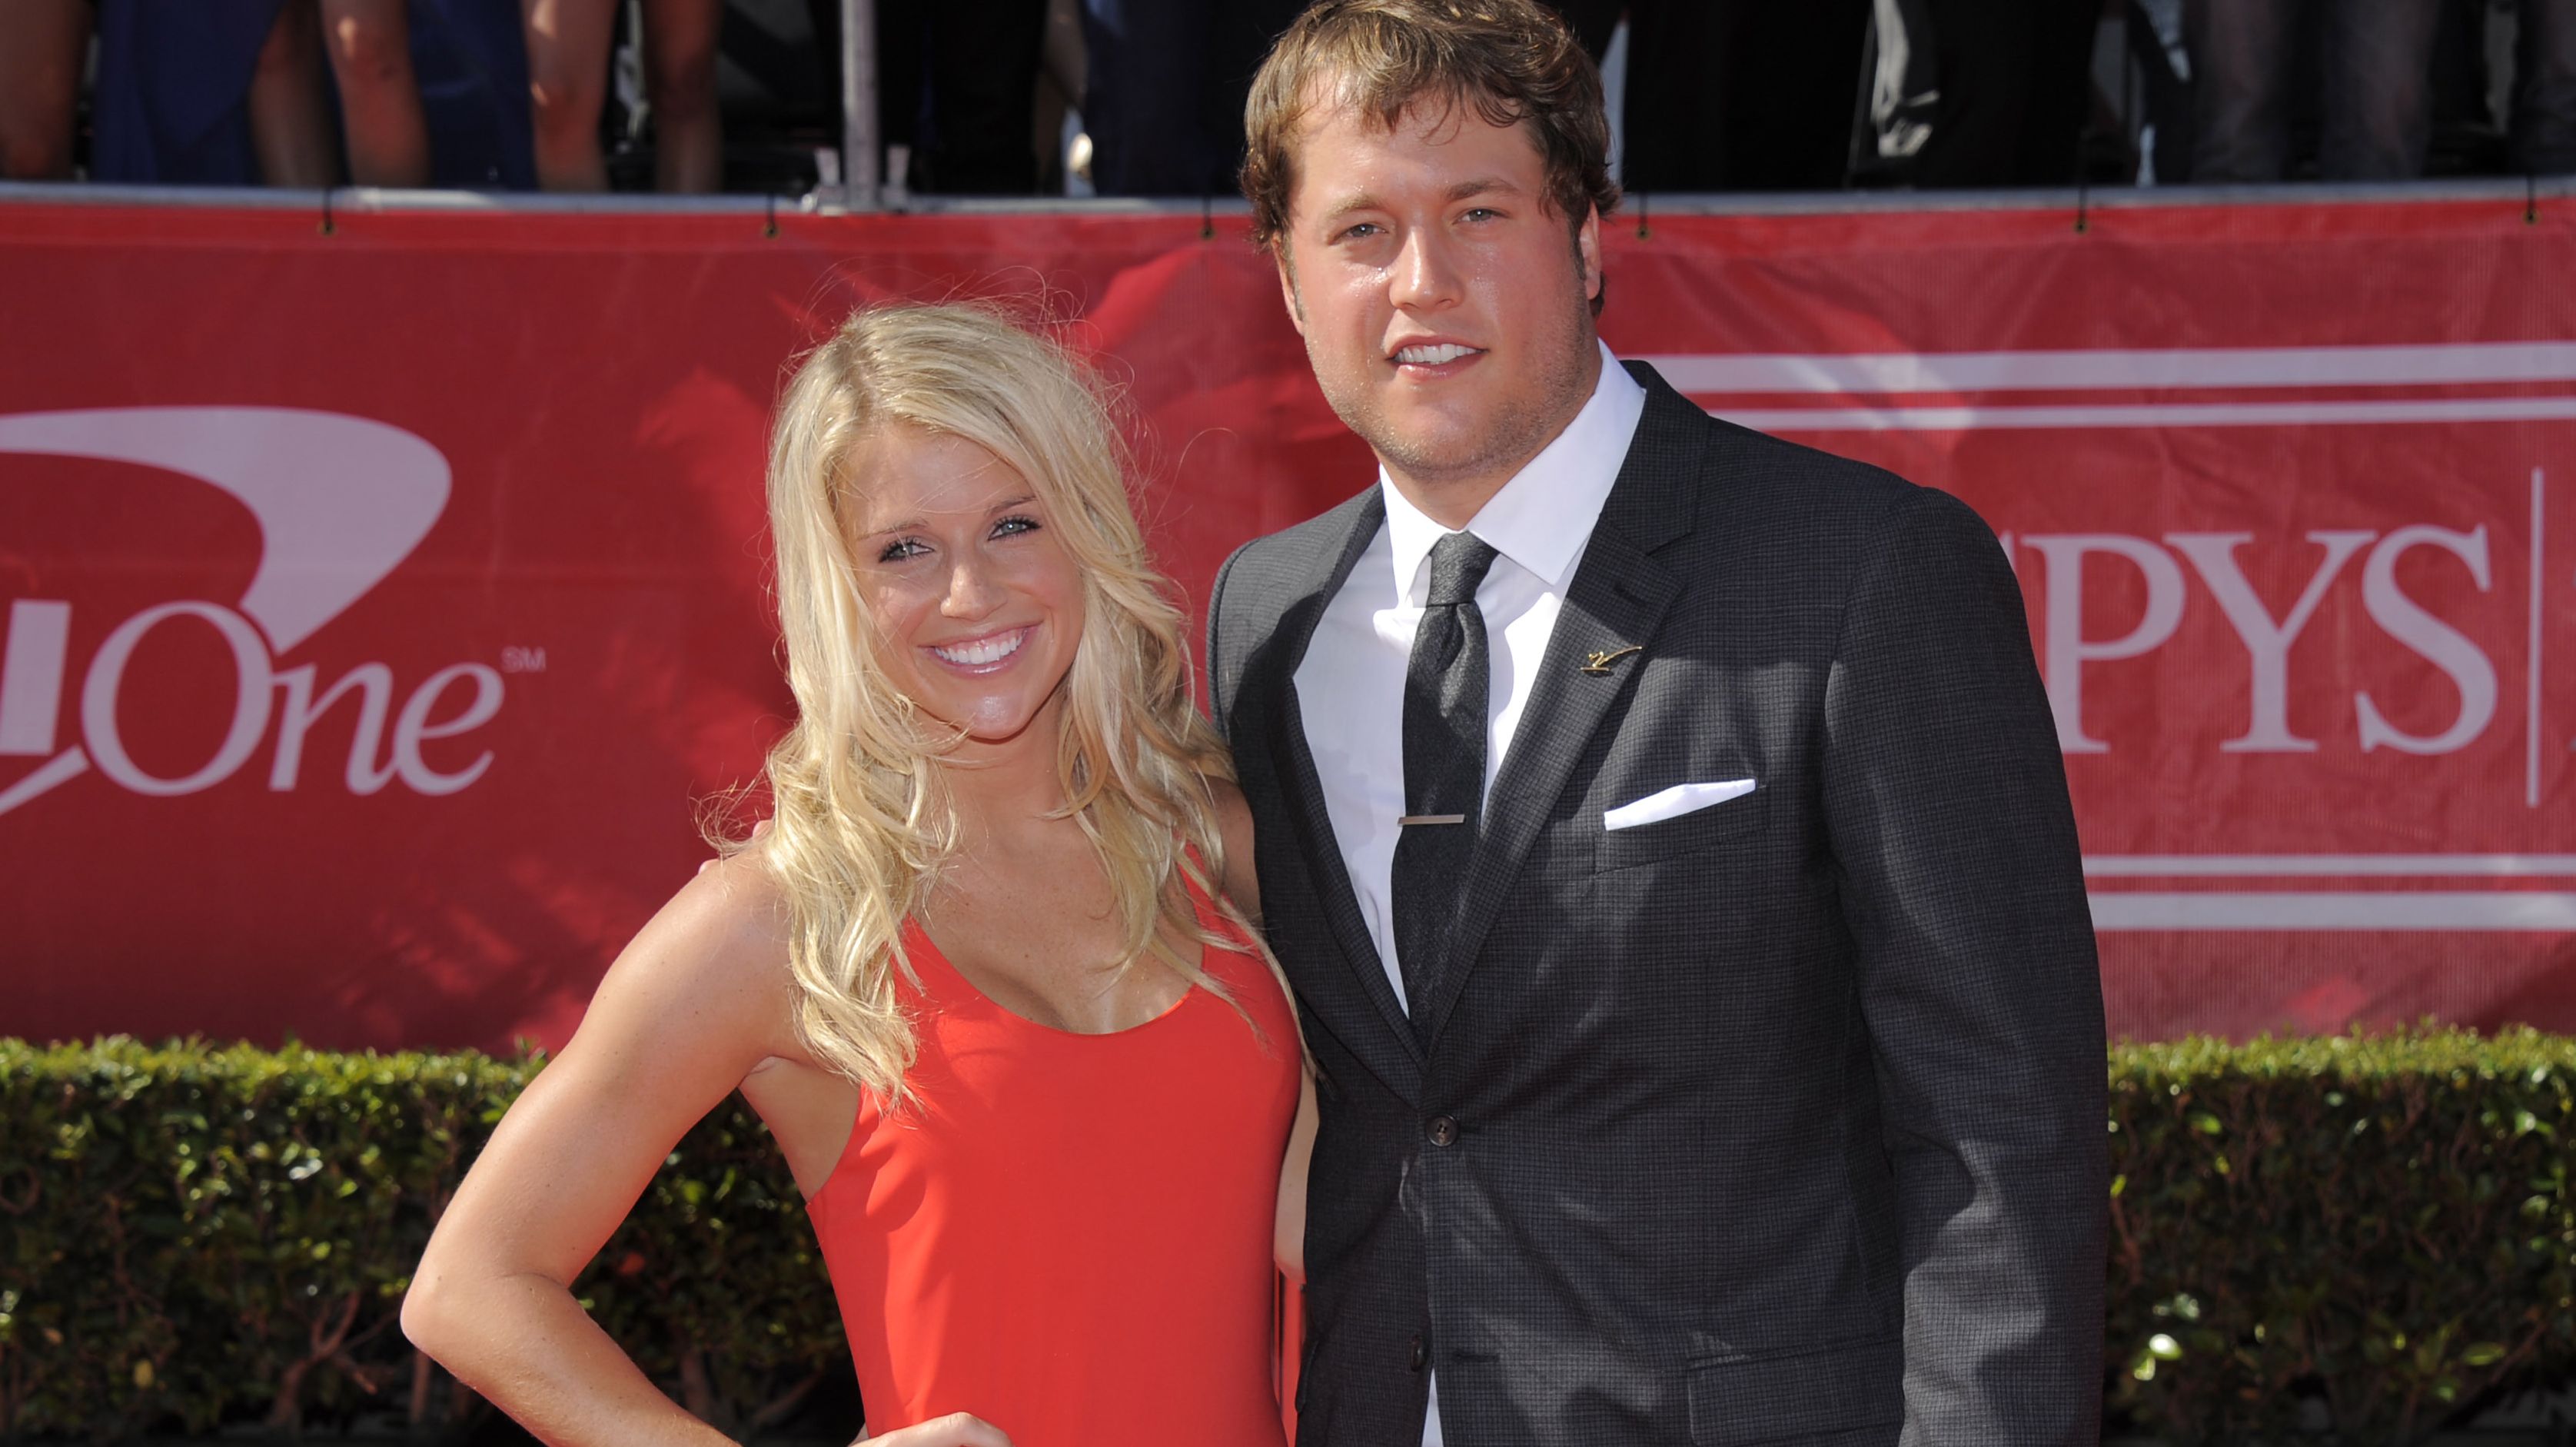 Wife of NFL QB posts update after brain surgery